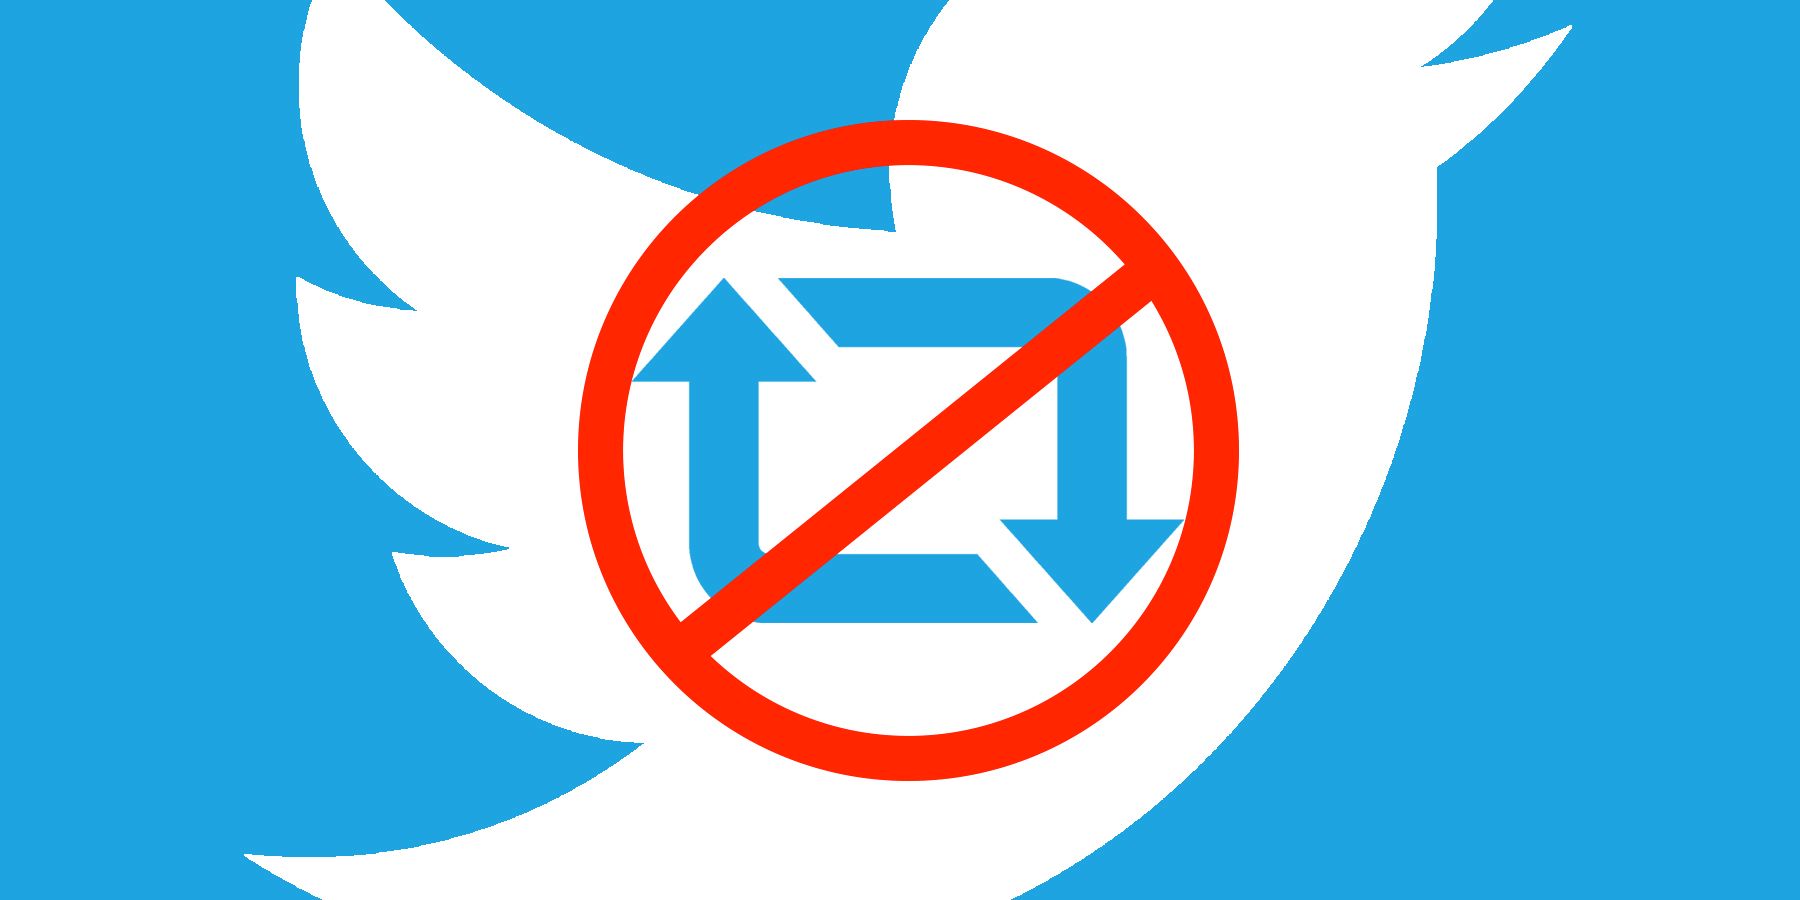 How to Turn off Retweets on Twitter - Qwitter